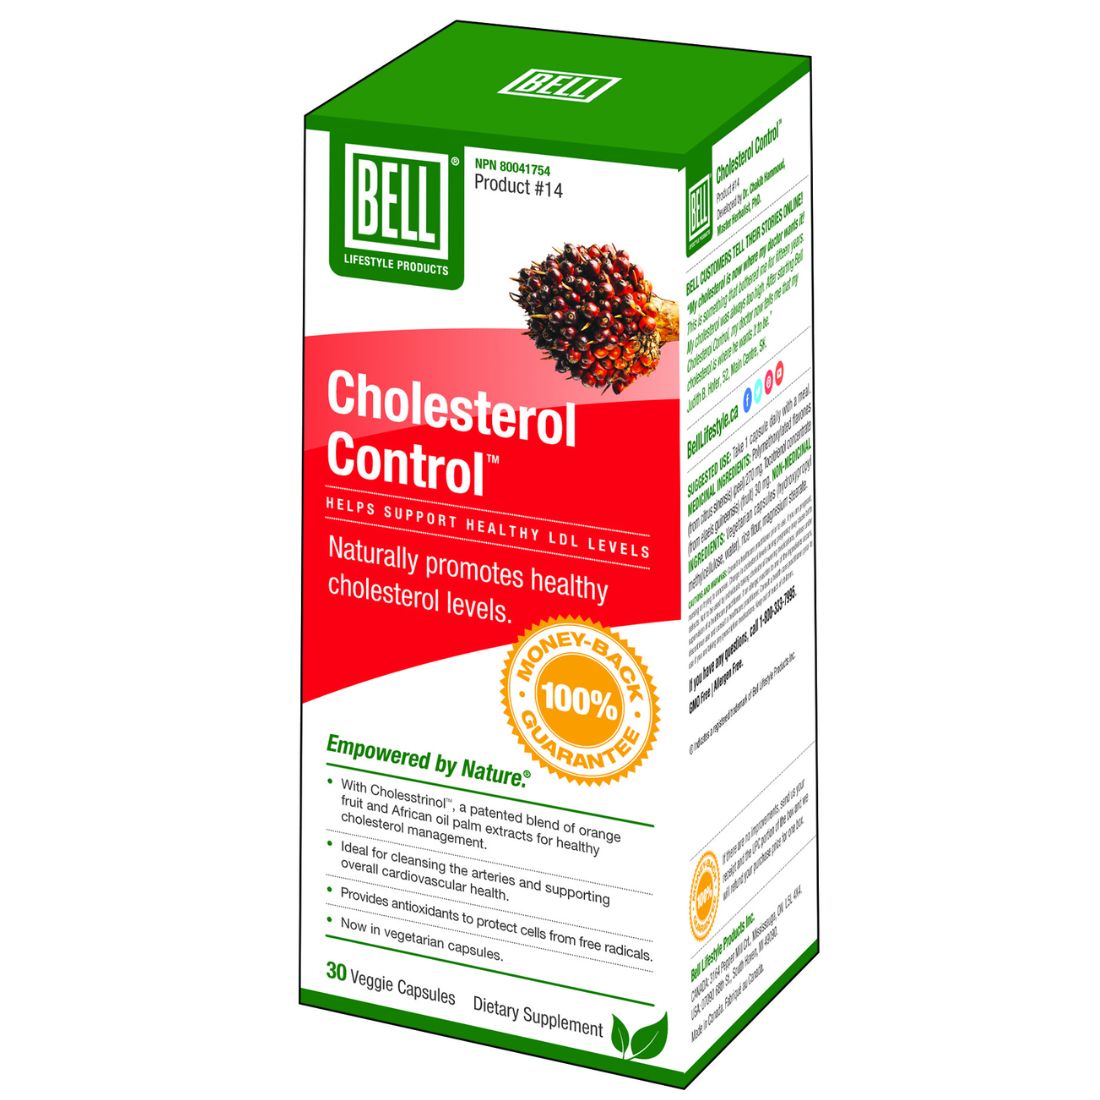 Bell Cholesterol Control #14, 30 Capsules